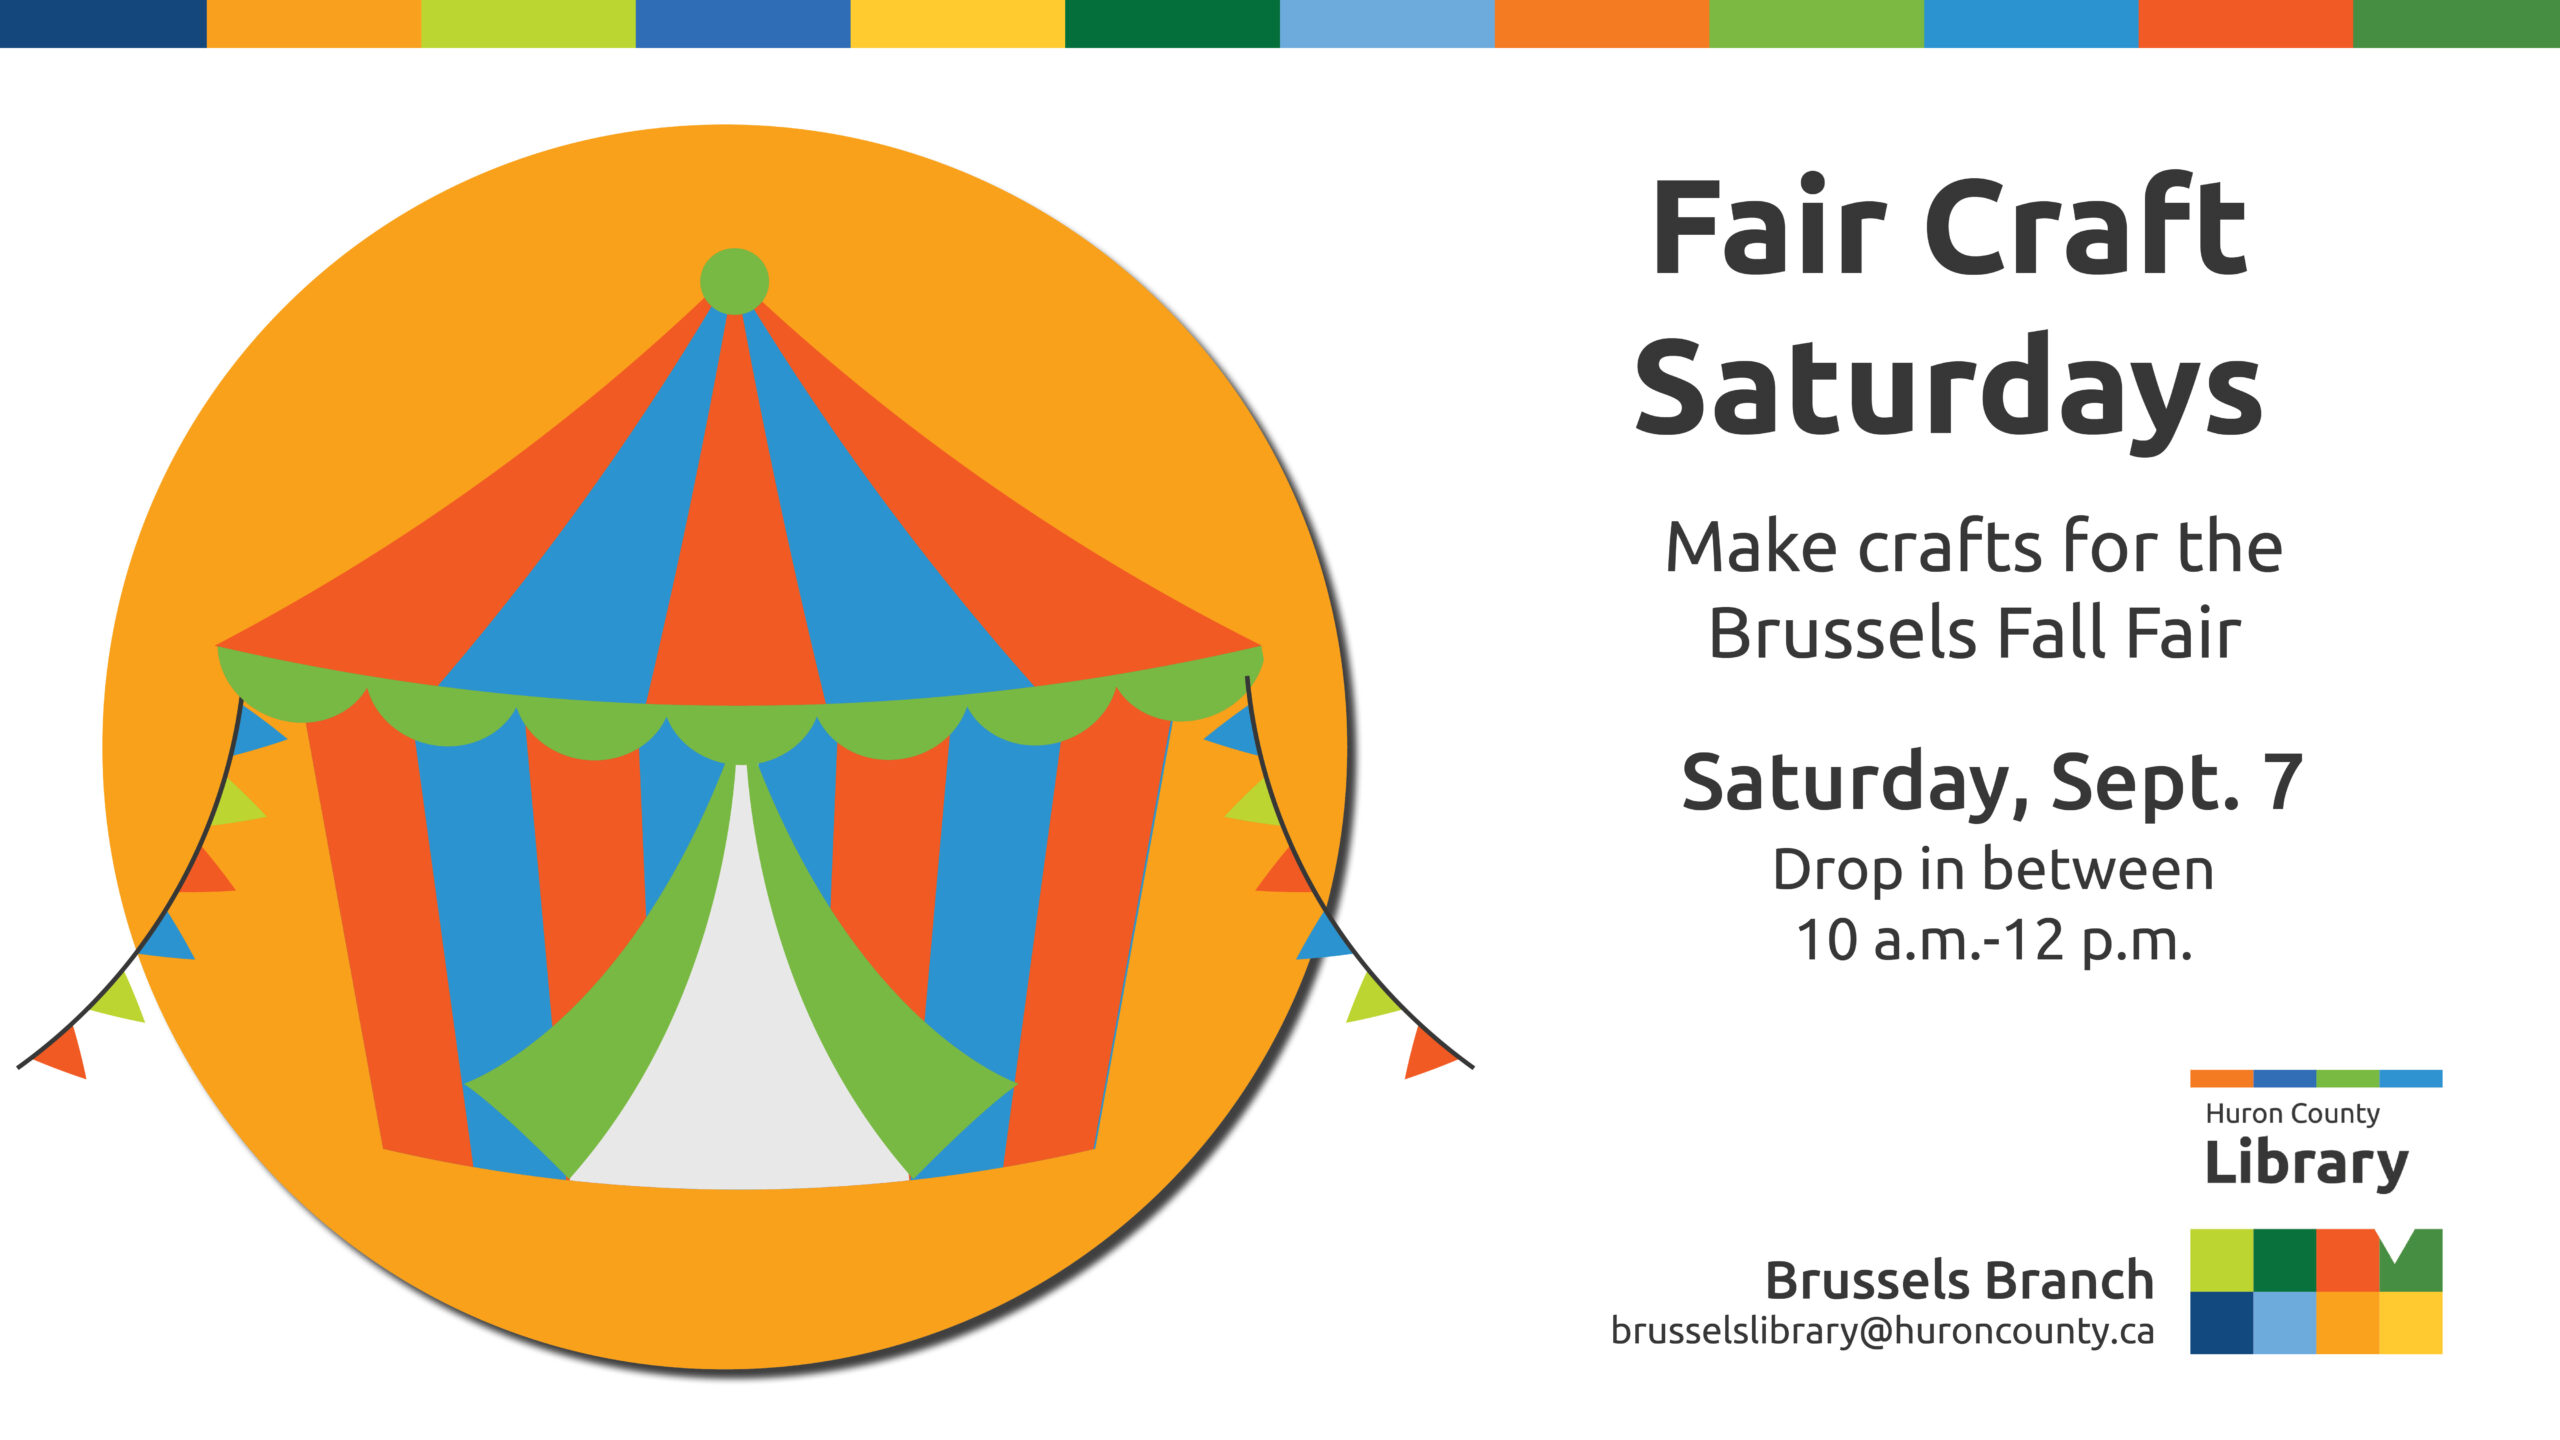 Illustration of a circus tent with text promoting Fair Crafts at Brussels